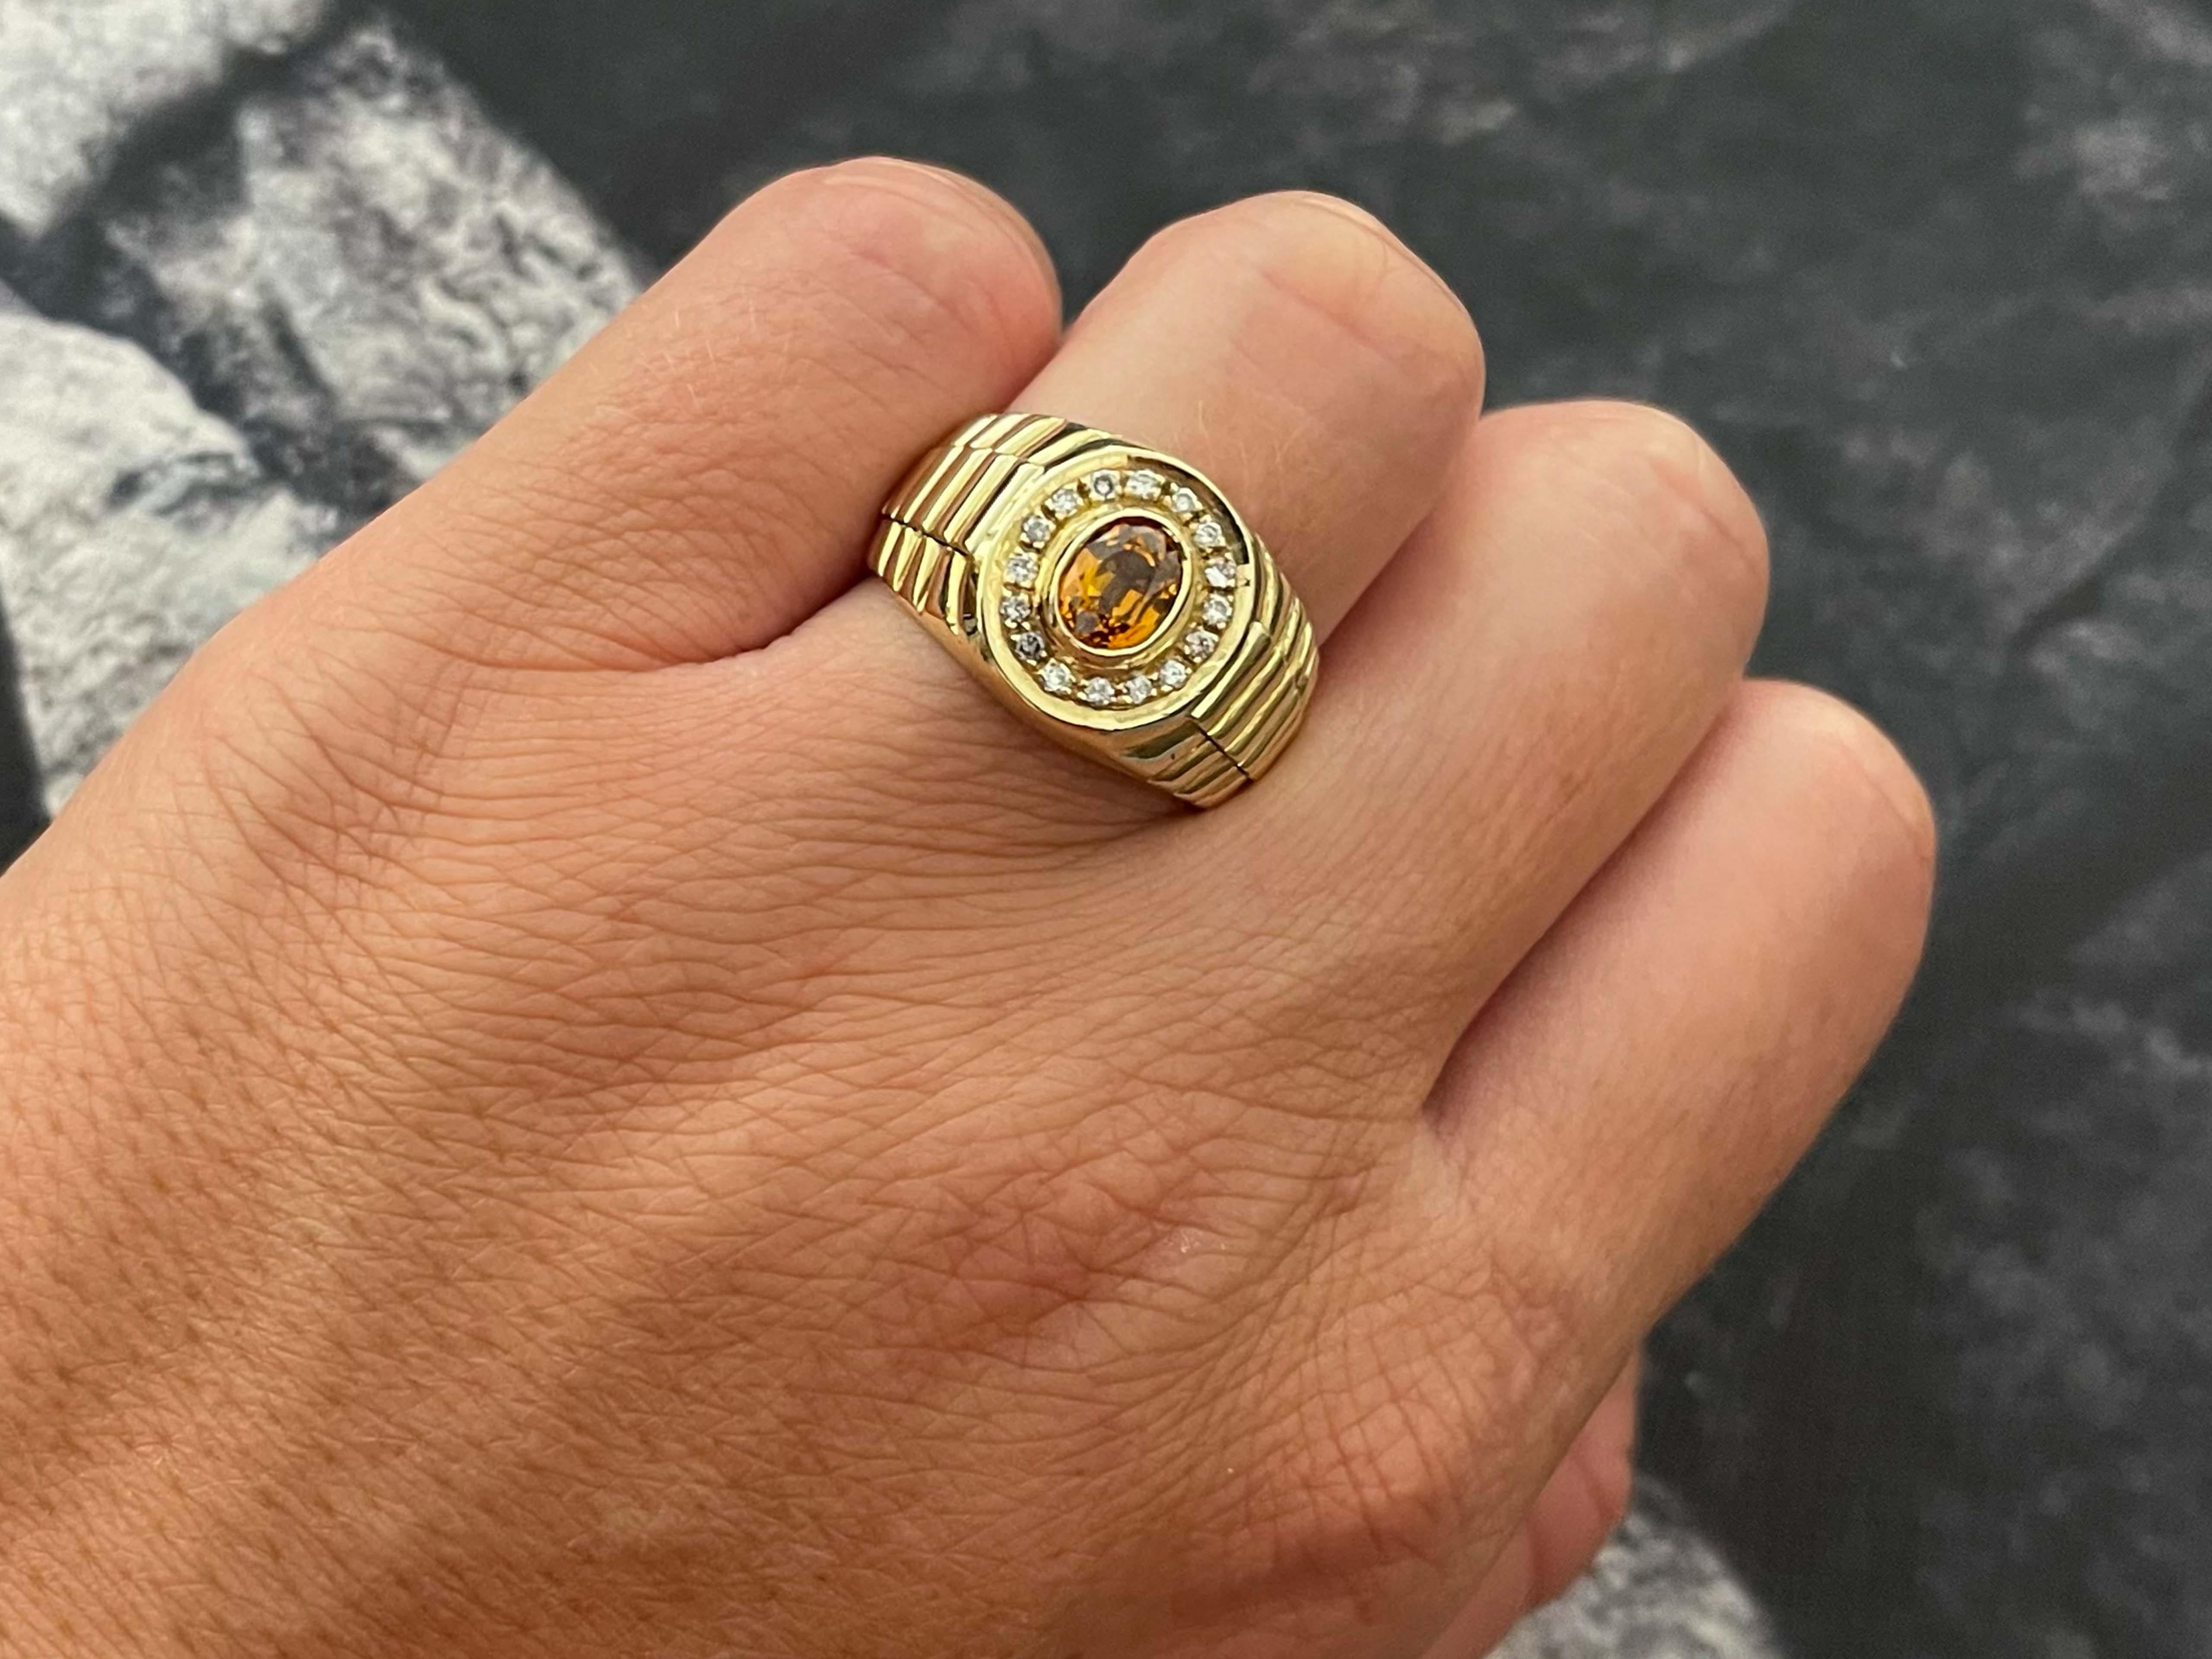 Item Specifications:

Metal: 14k Yellow Gold

Style: Statement Ring

Ring Size: 8.75 (resizing available for a fee)

Total Weight: 10 Grams

Gemstone Specifications: Citrine 

Citrine Carat Weight: 0.61 carats

Color: Golden Orange

Cut: Oval